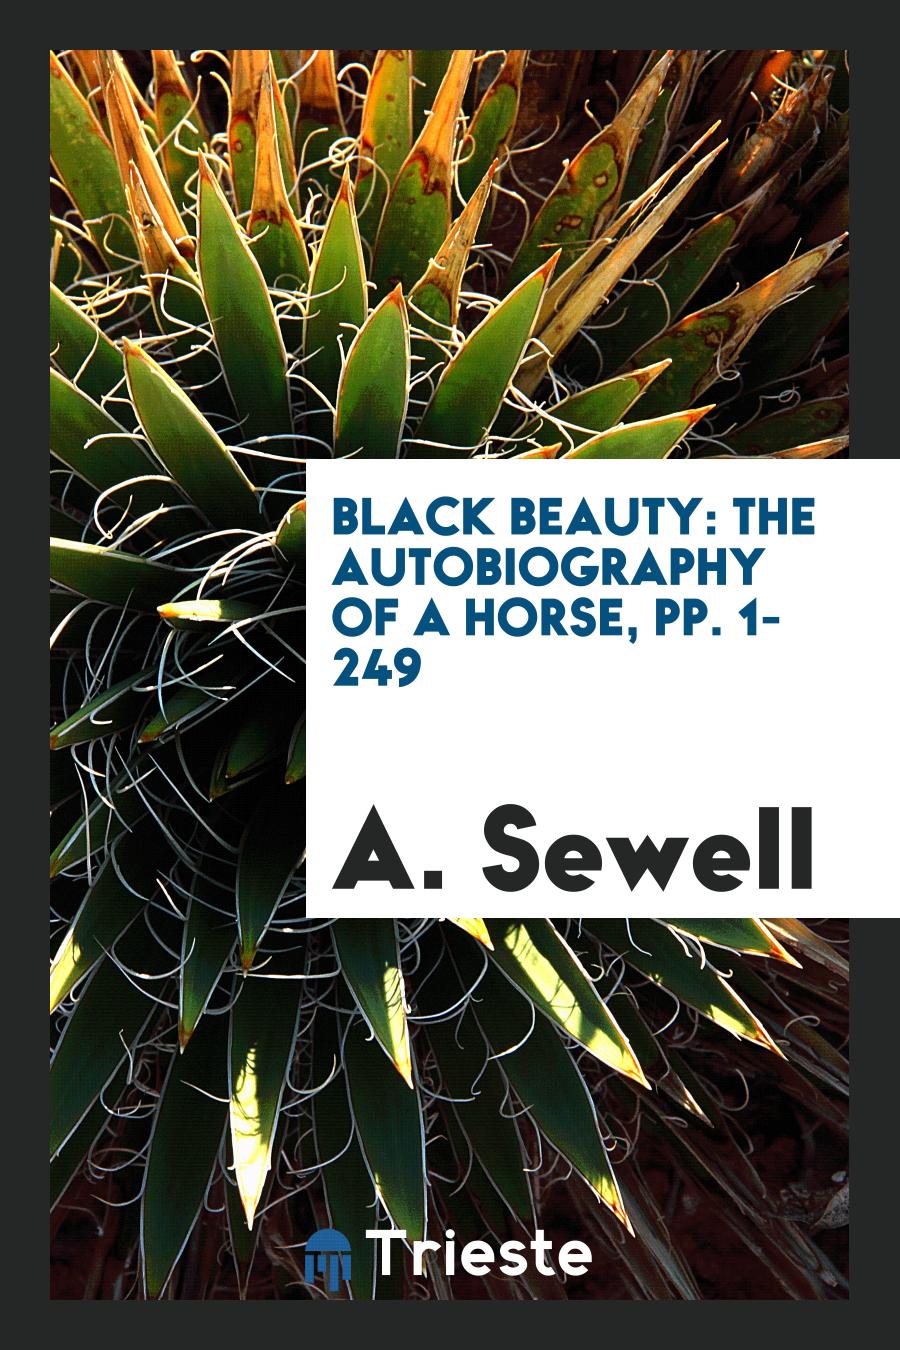 Black Beauty: The Autobiography of a Horse, pp. 1-249